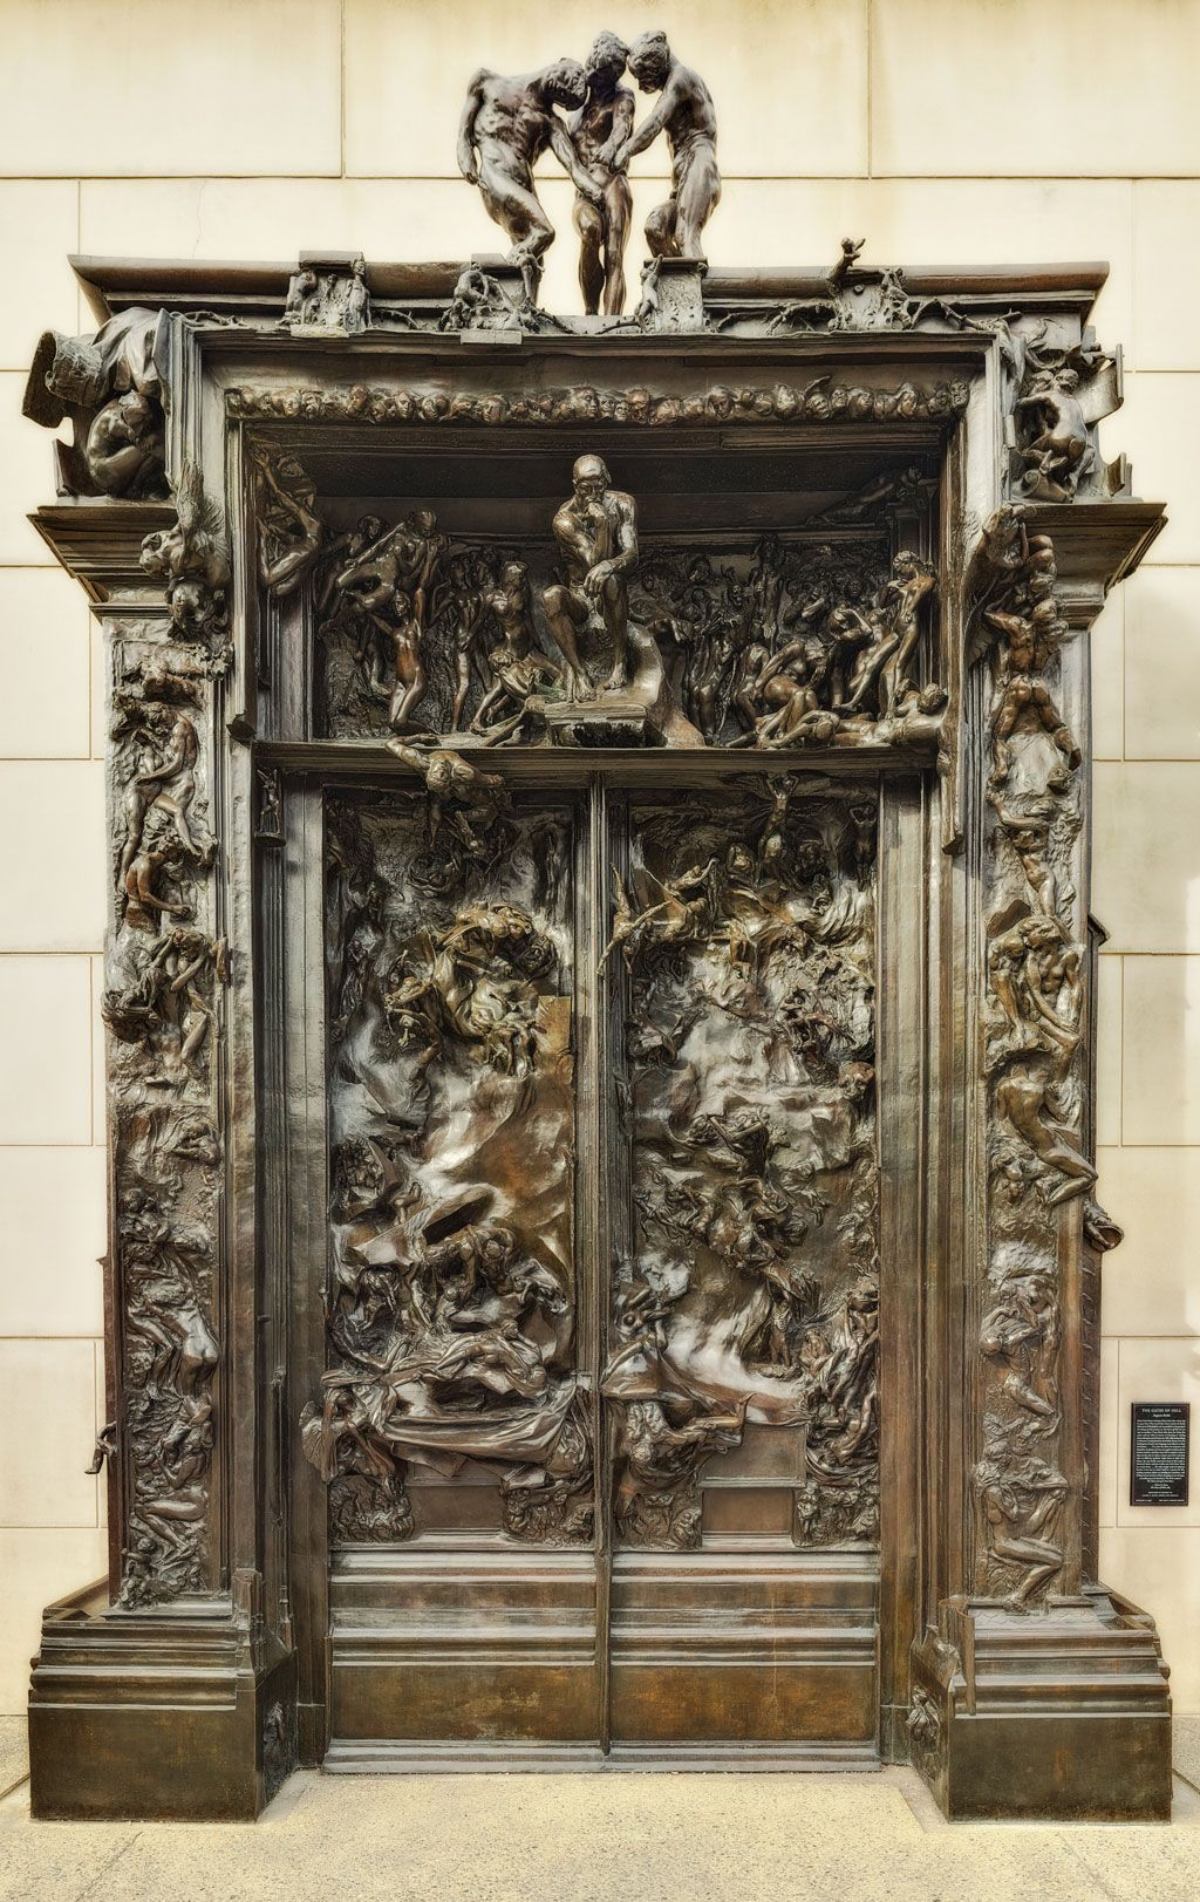 "Gates of Hell" by Auguste Rodin